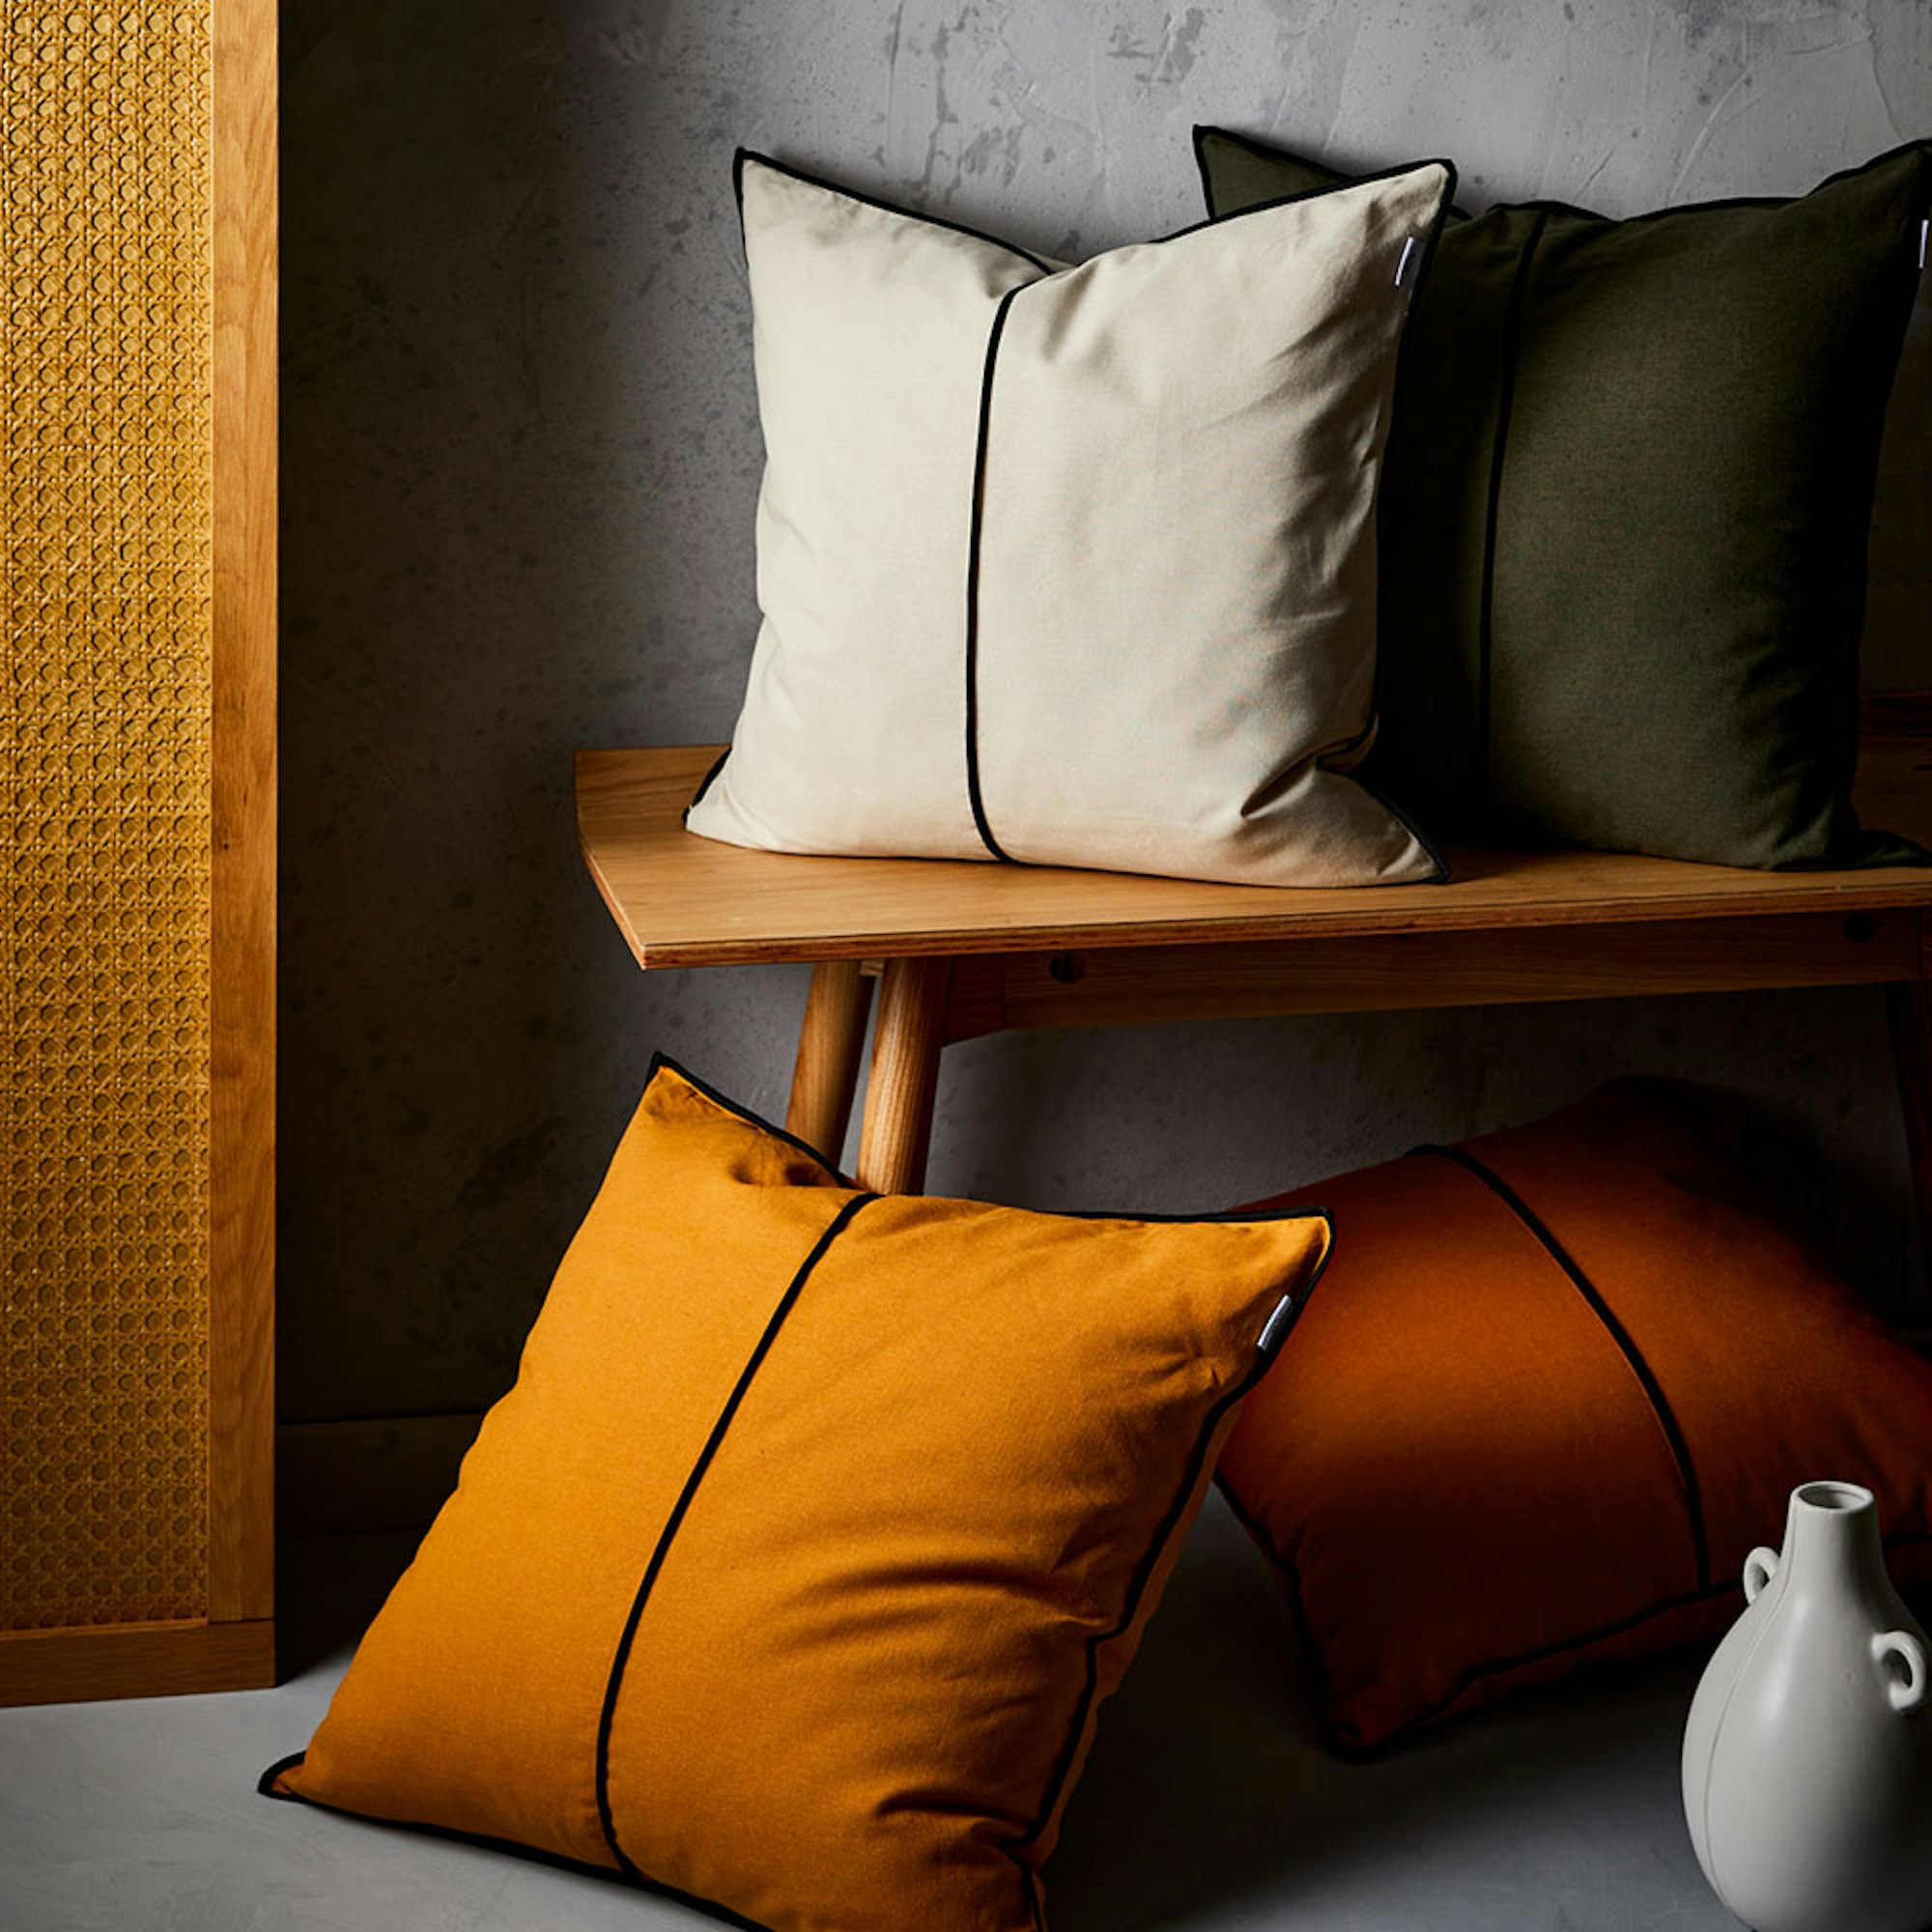 Neale Whitaker SS23 Tooli Cushion. Stacks of cushions in earthy shades with black piping detail